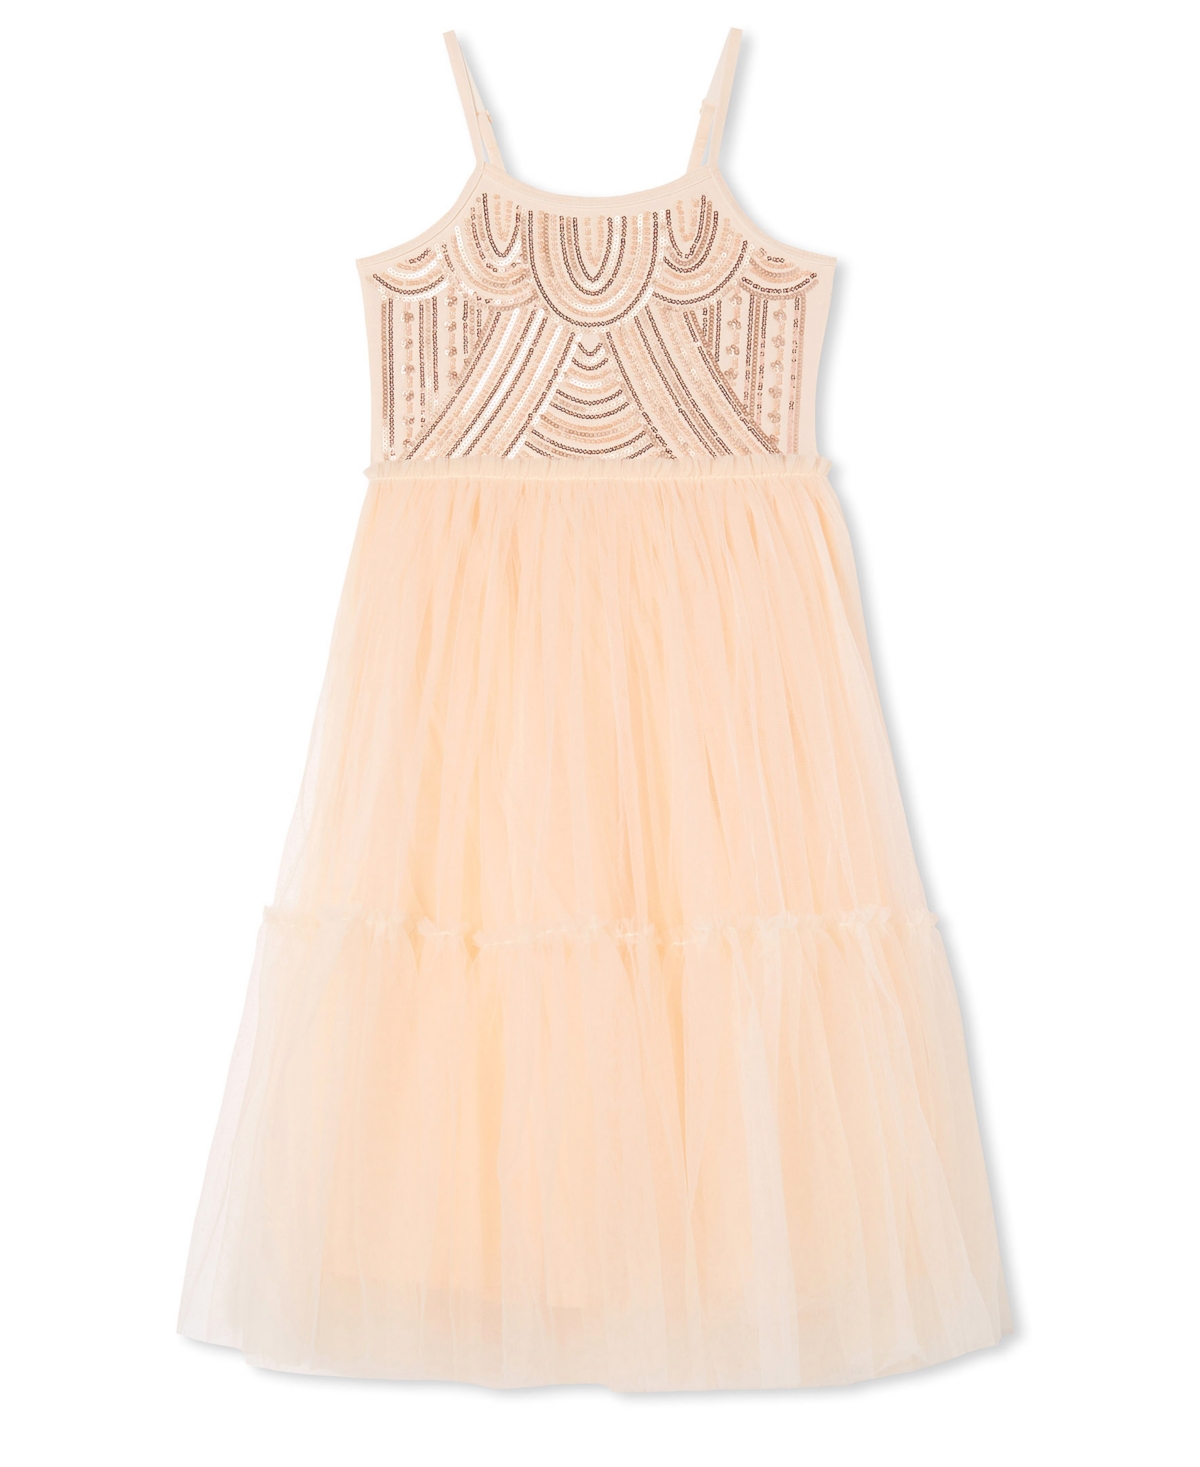 Cotton On Toddler Girls Iris Dress Up Dress In Champagne/deco Sparkle